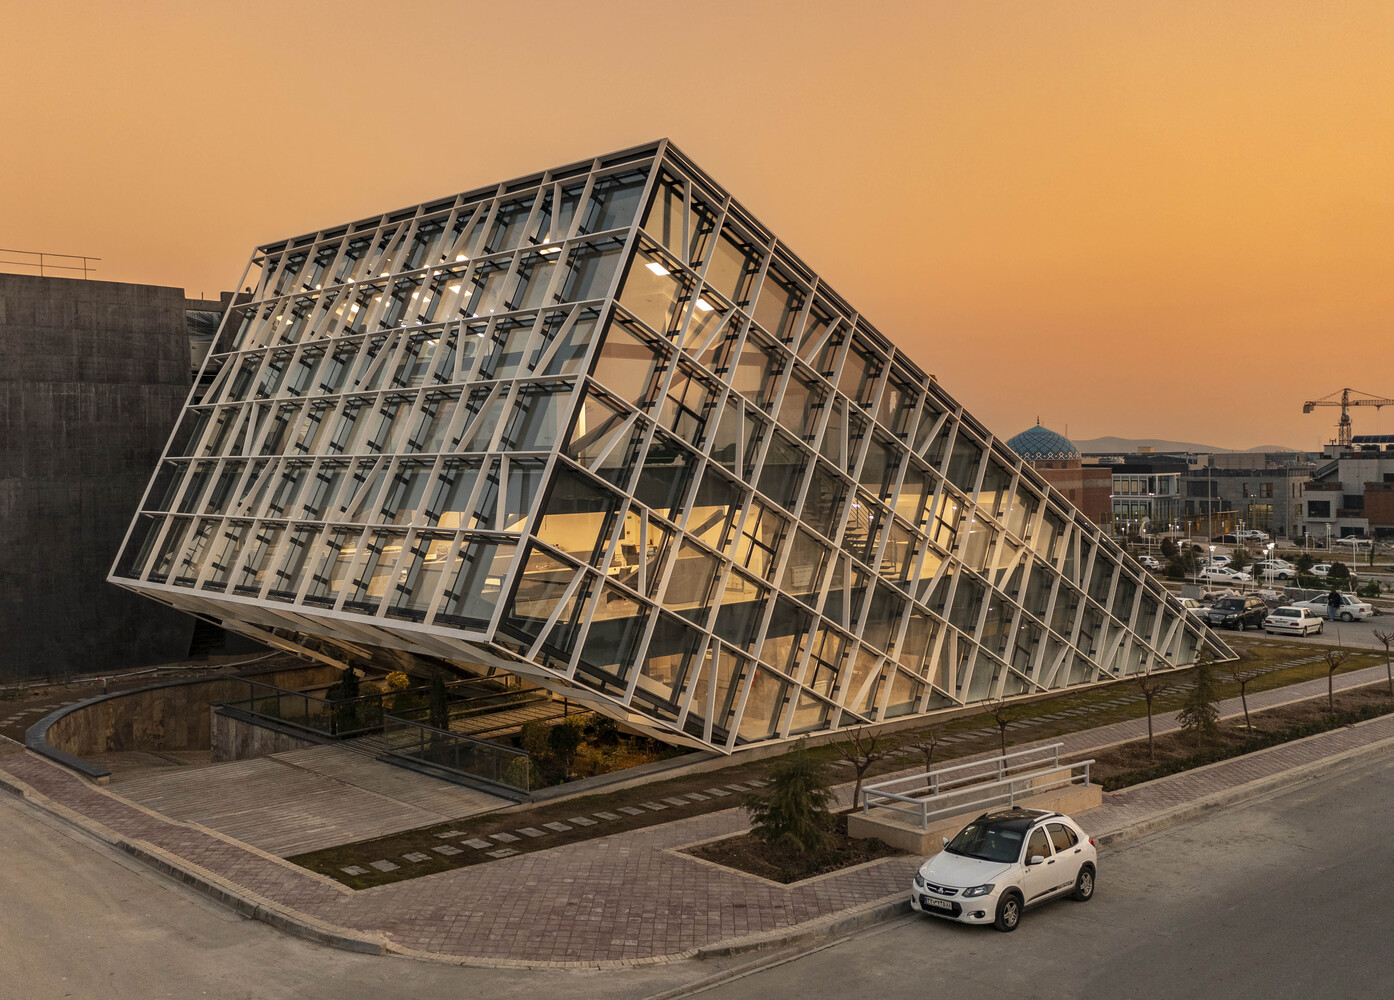 The new incubator and office building Turbosealtech designed by New Wave Architecture